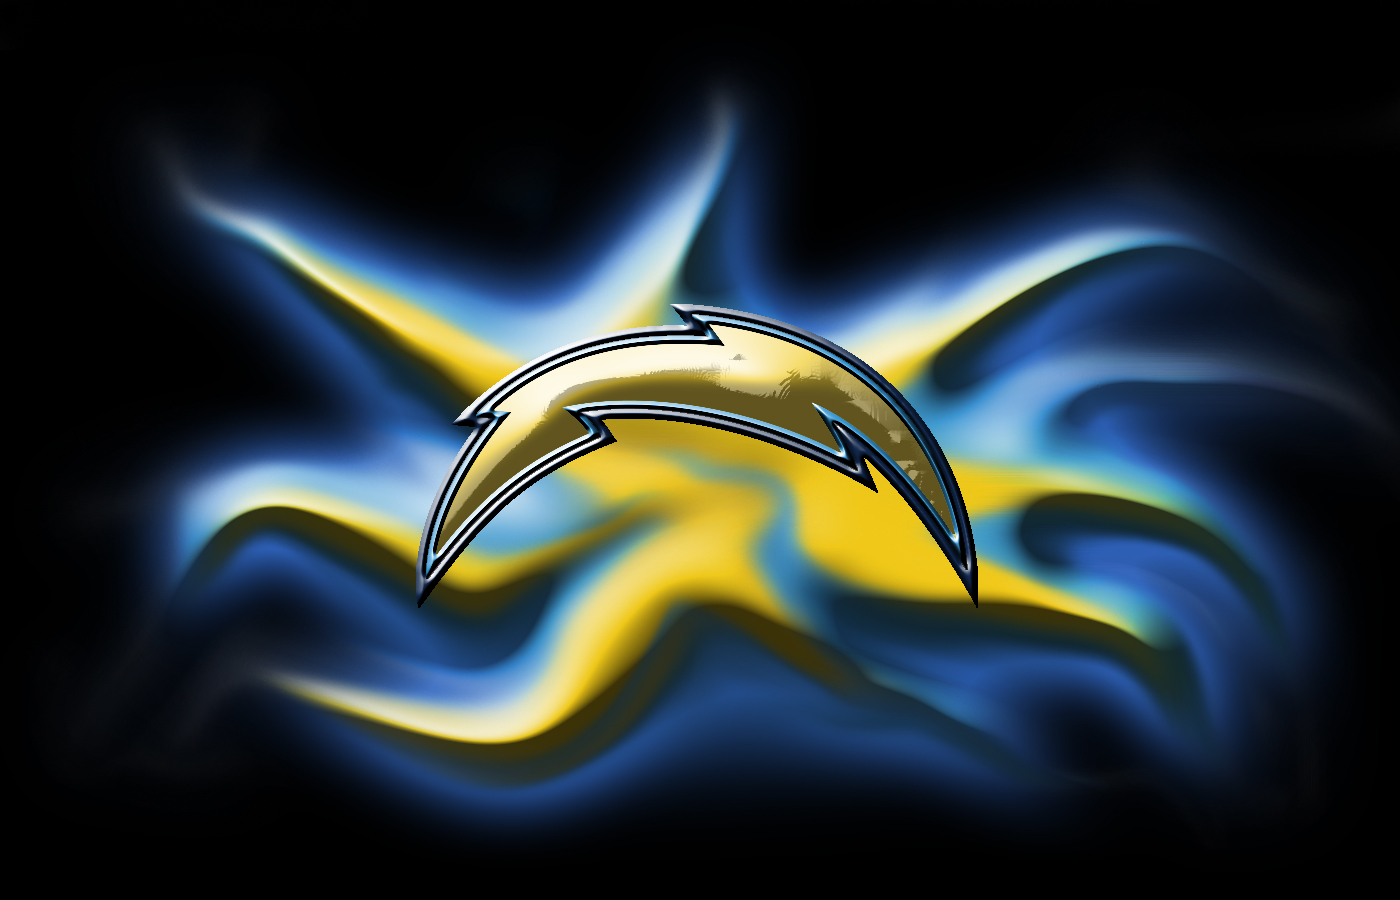 Chargers Football Team Logo Wallpaper For Other Size Puter